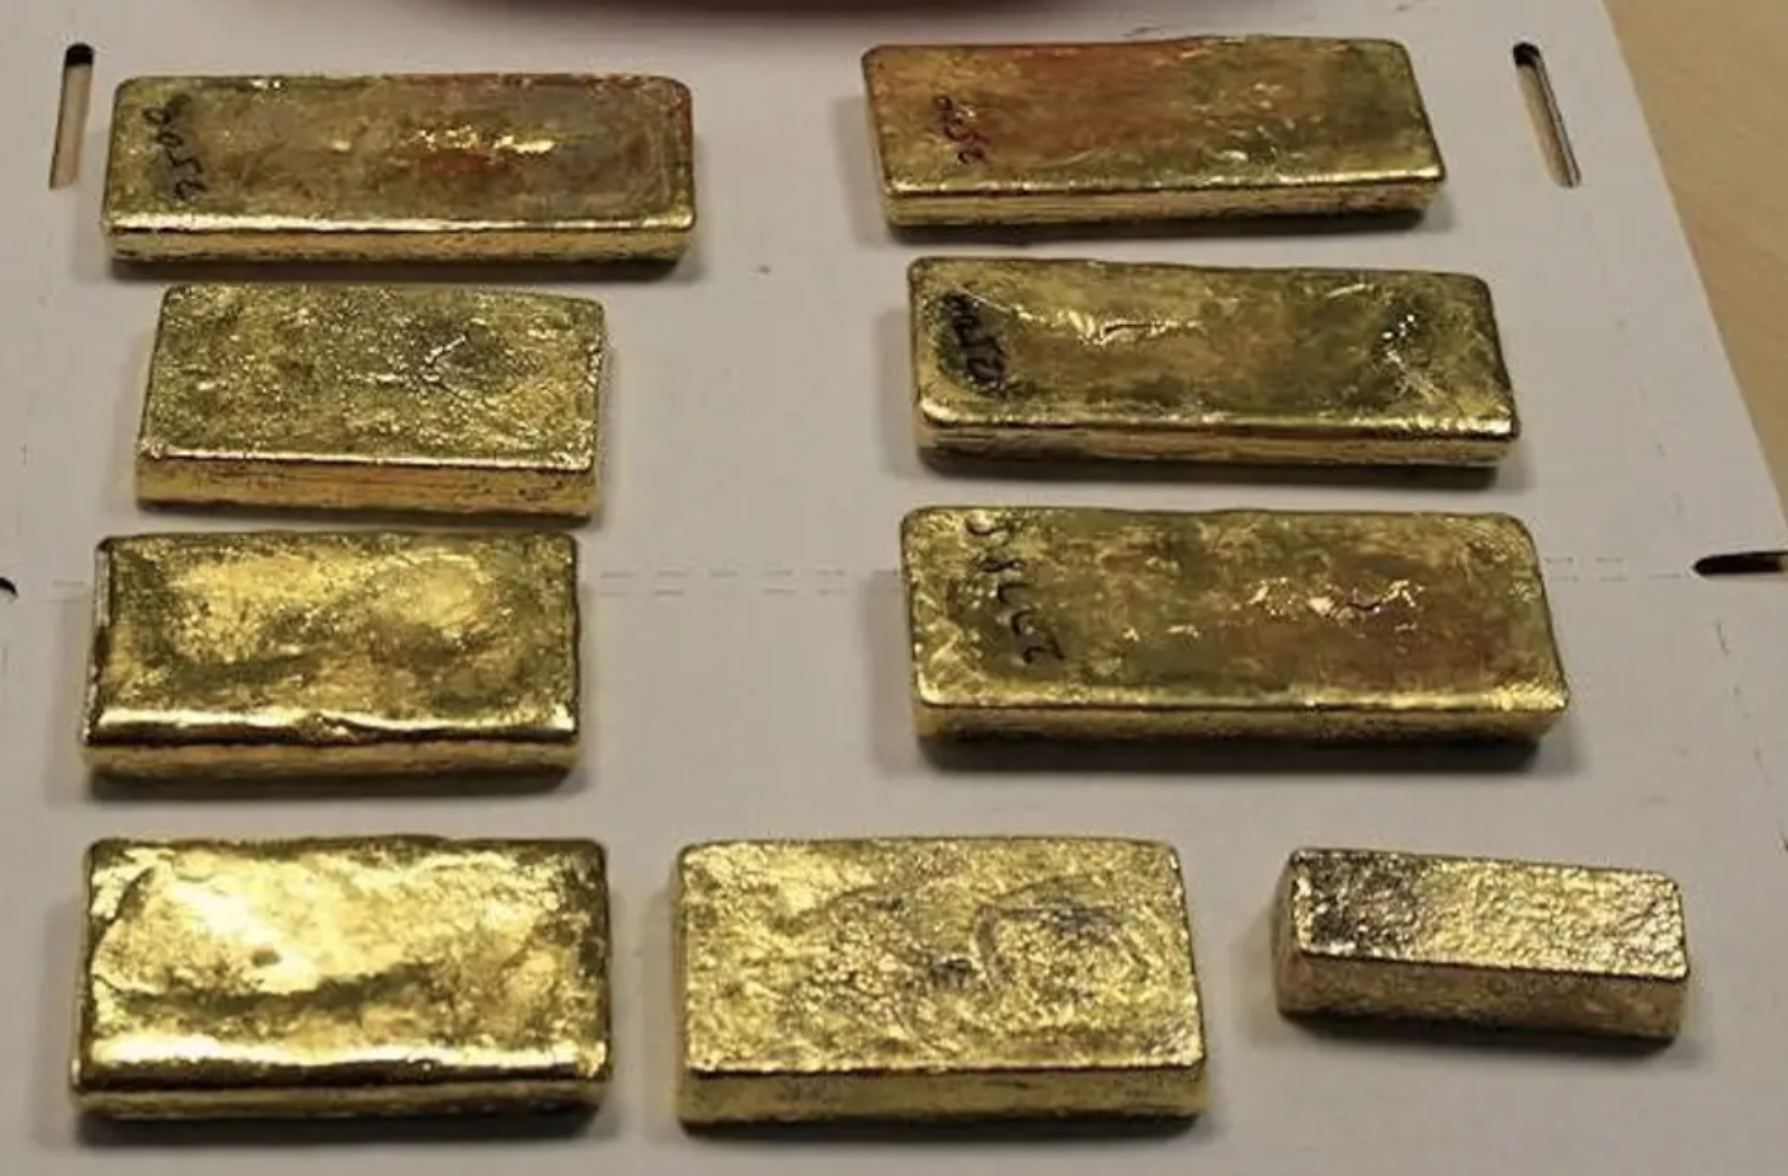 35lbs (16kg) gold bars seized from a Dubai-bound passenger  by HMRC